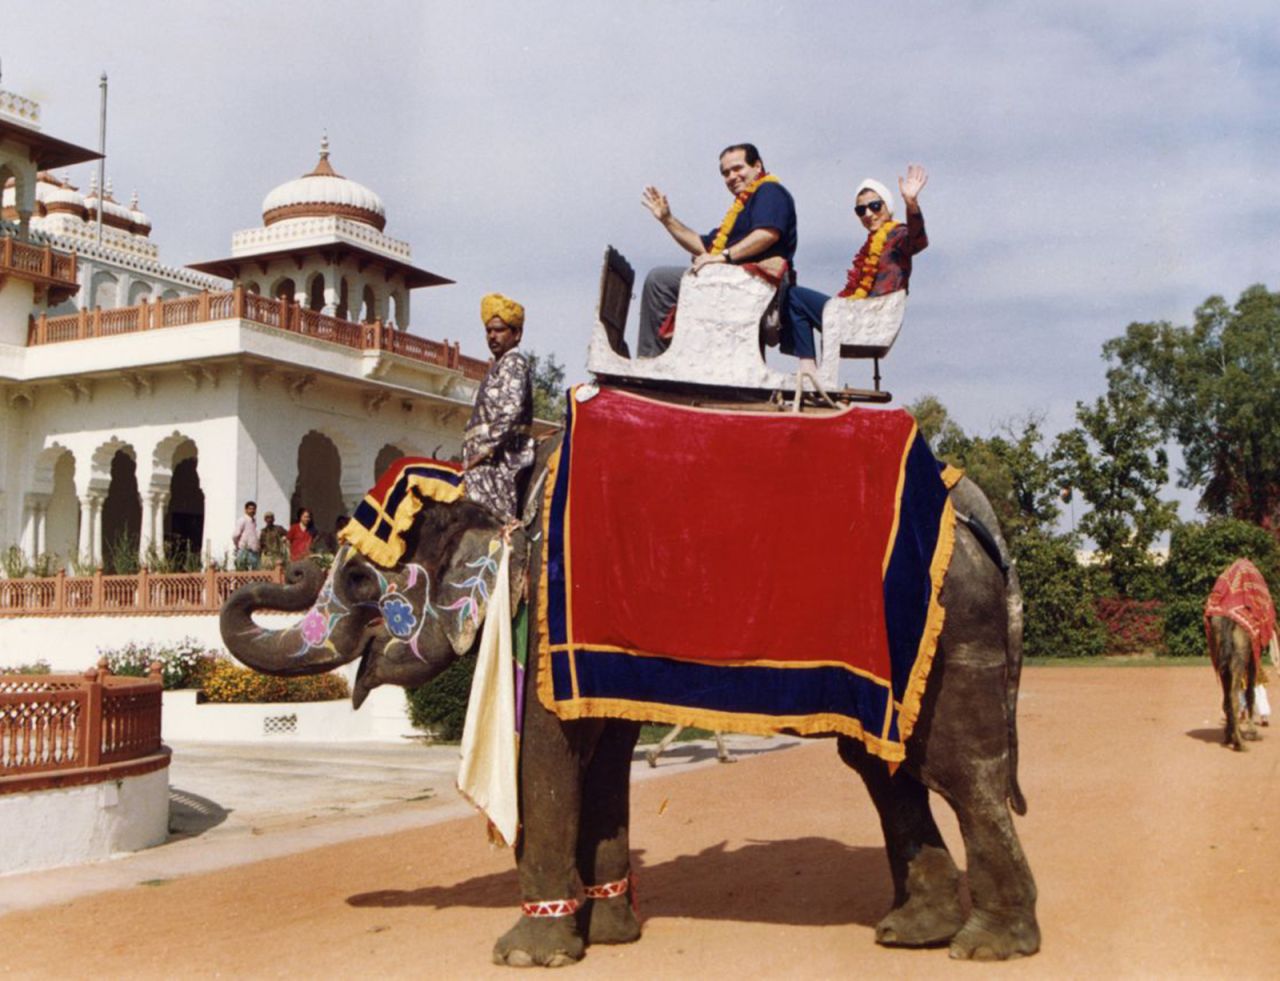 Scalia and Ginsburg pose on an elephant during their tour of India in 1994. Scalia once said they were an "odd couple" and he counted her as his "best buddy" on the bench.